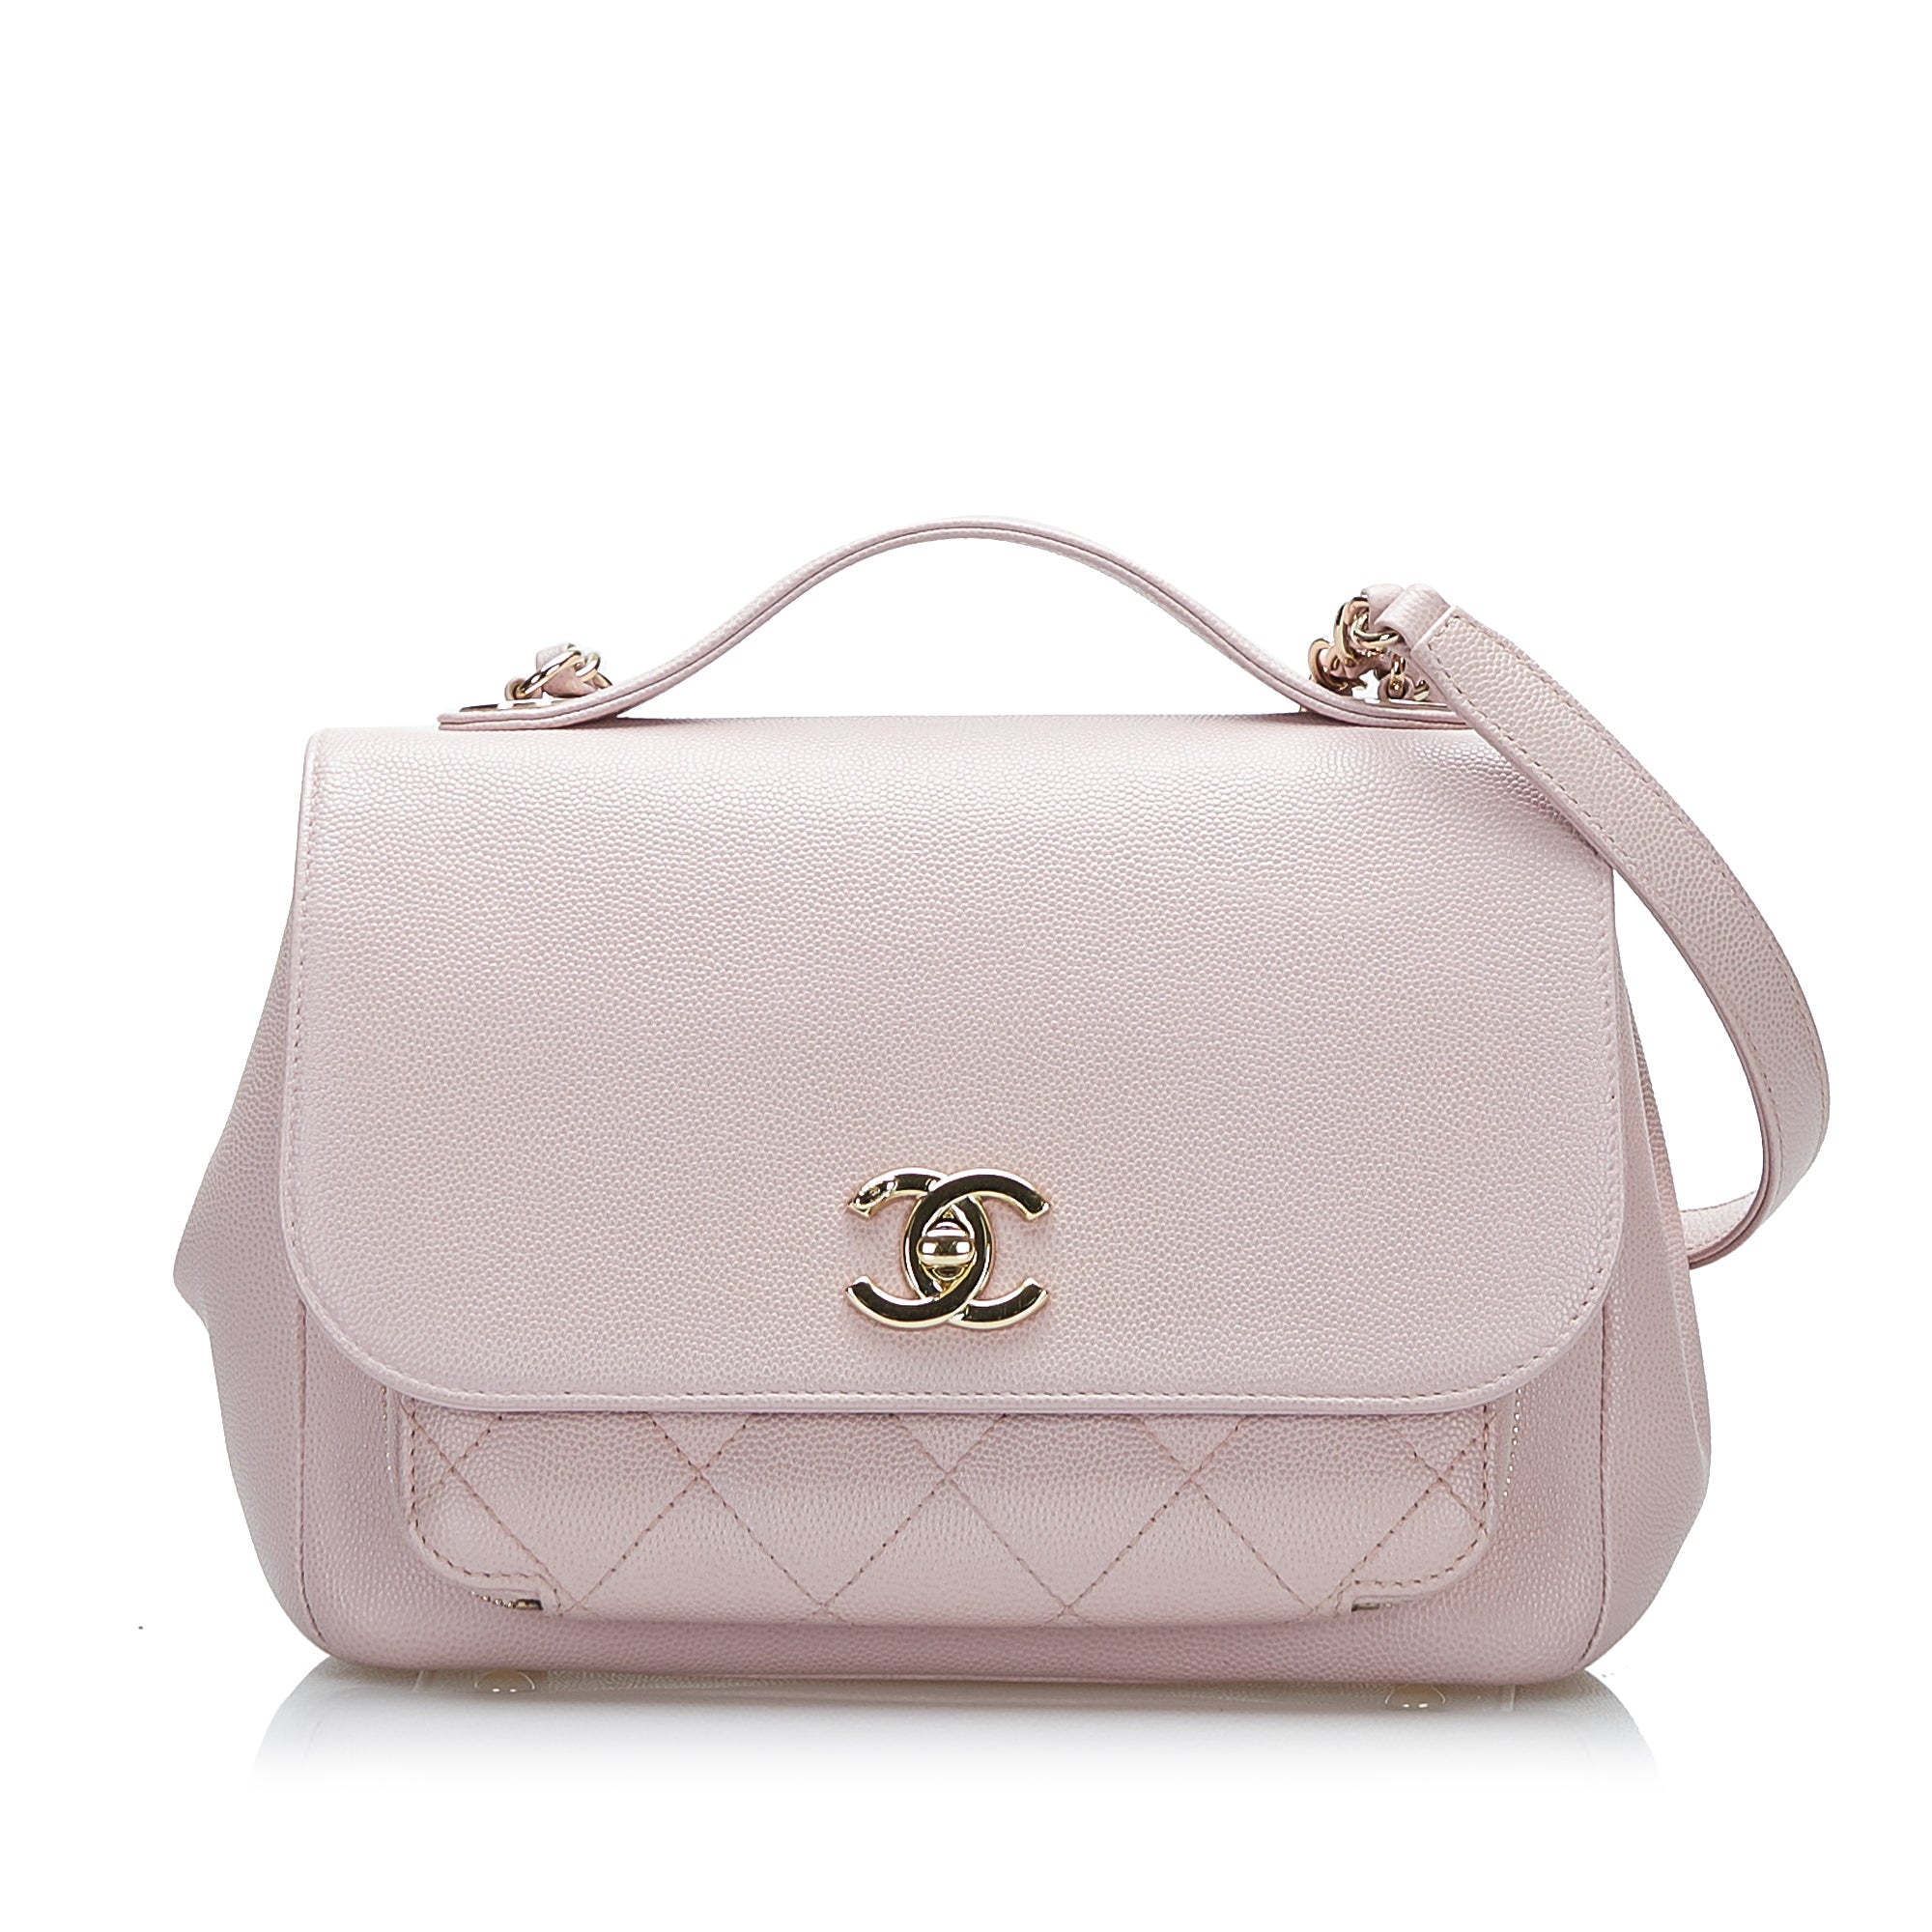 Chanel Small Business Affinity Flap Bag - Grey Handle Bags